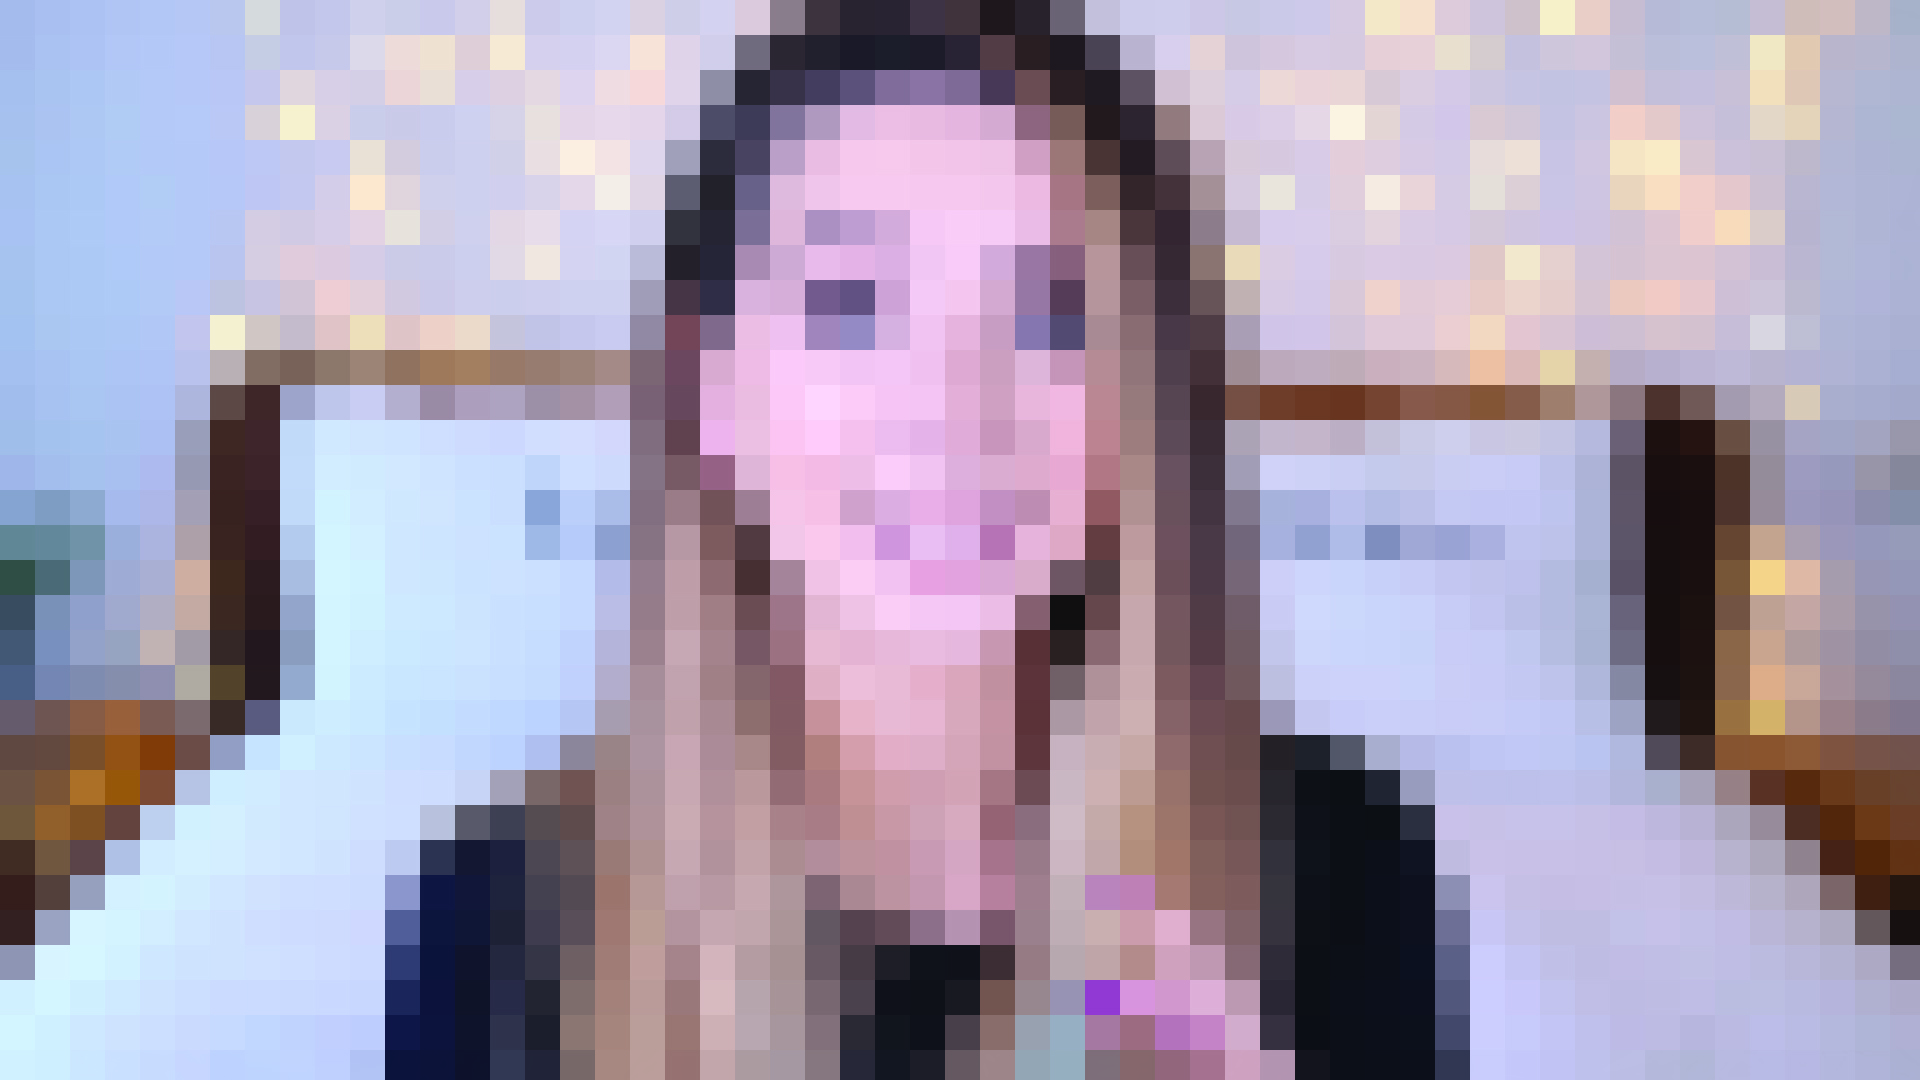 Can you guess who this pixelated YouTuber is?